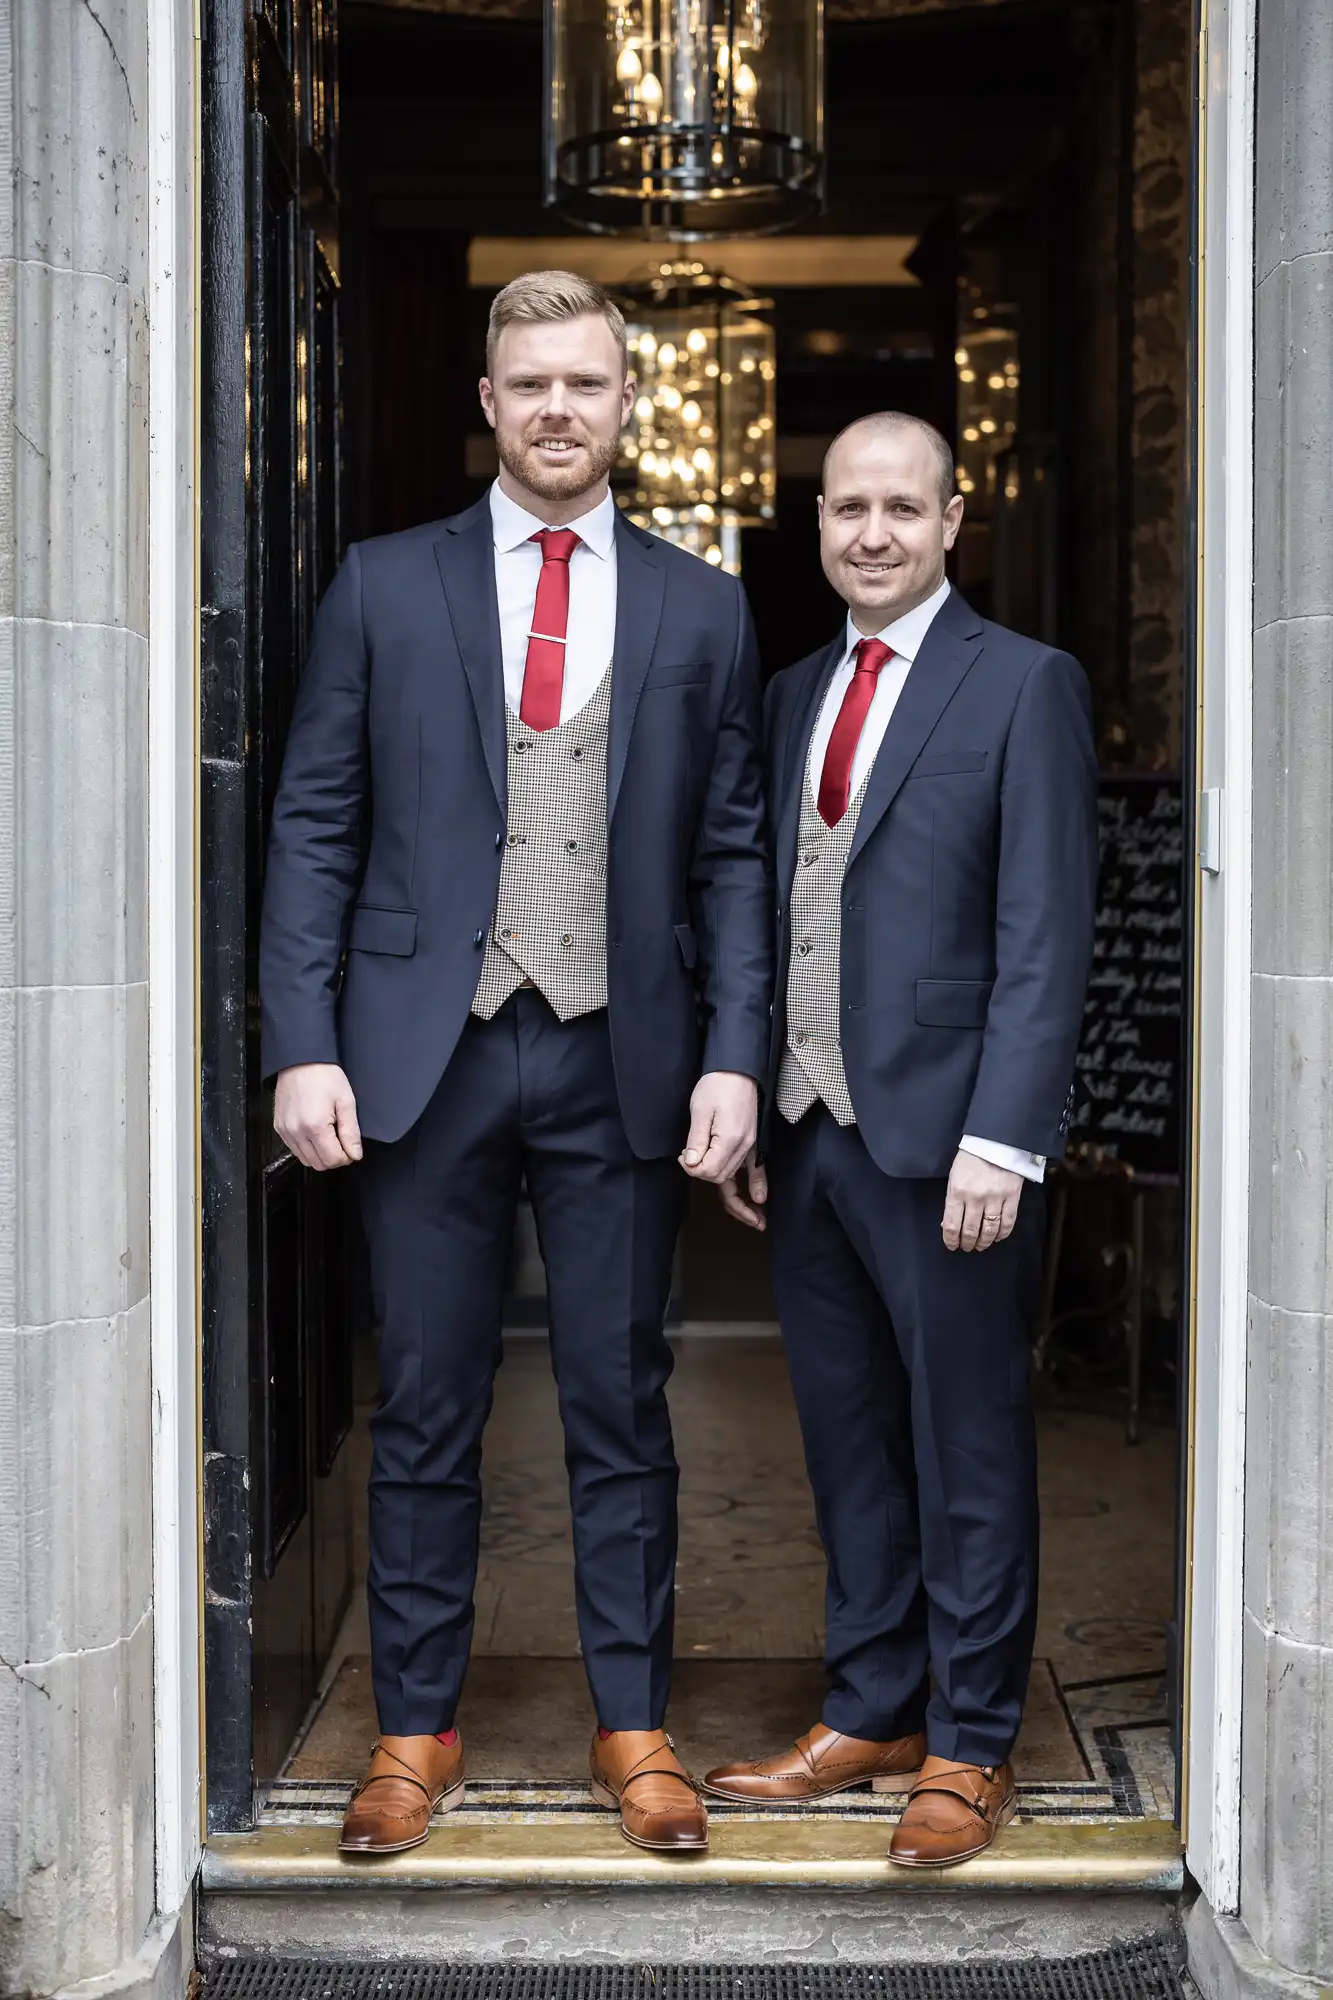 Two men in business suits and red ties standing in a doorway, smiling at the camera.